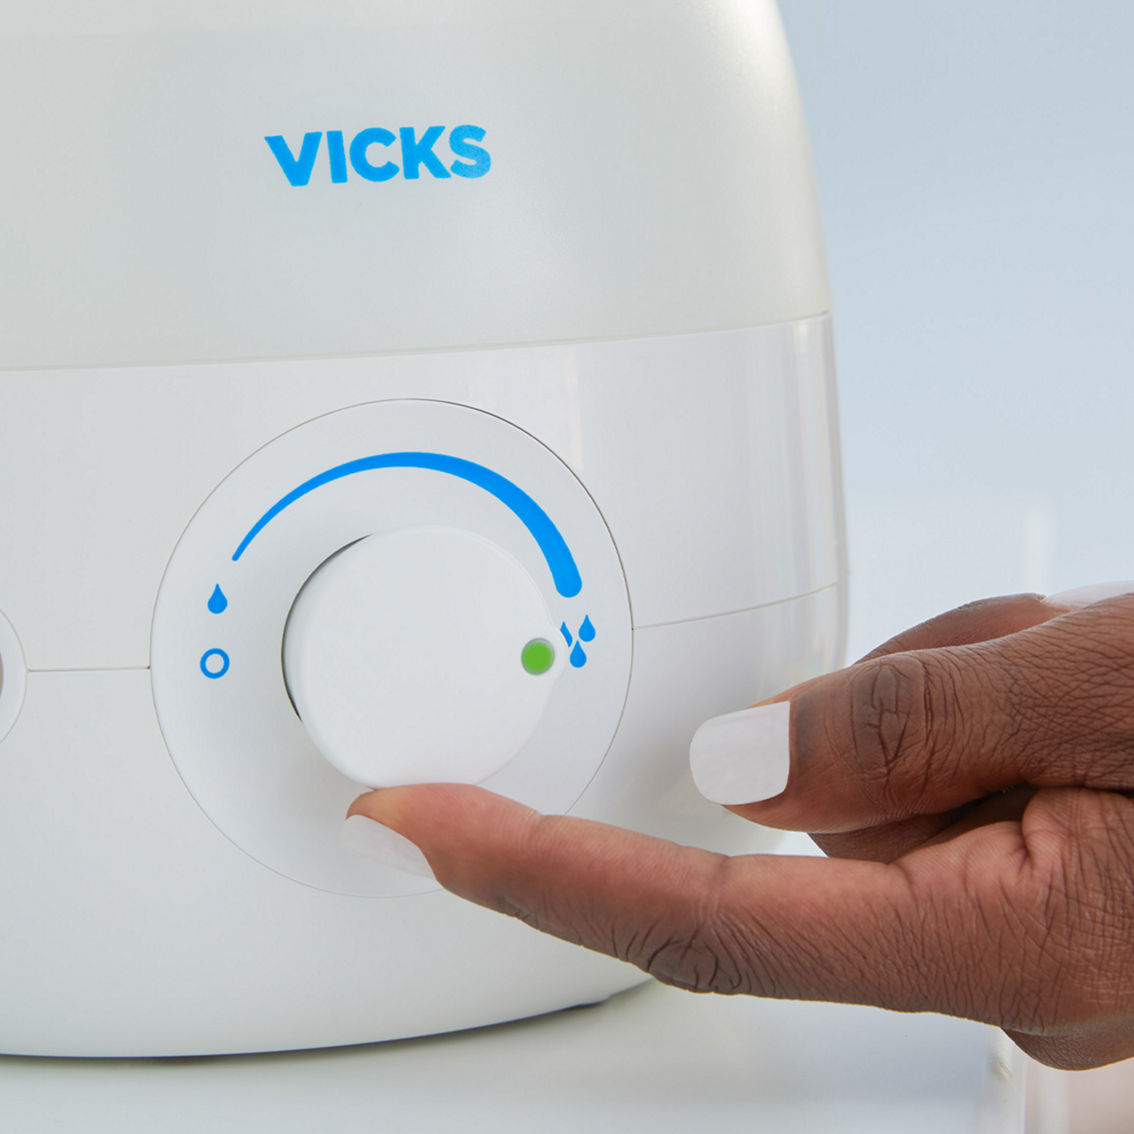 Vicks Cool Mist Humidifier - Image 4 of 7